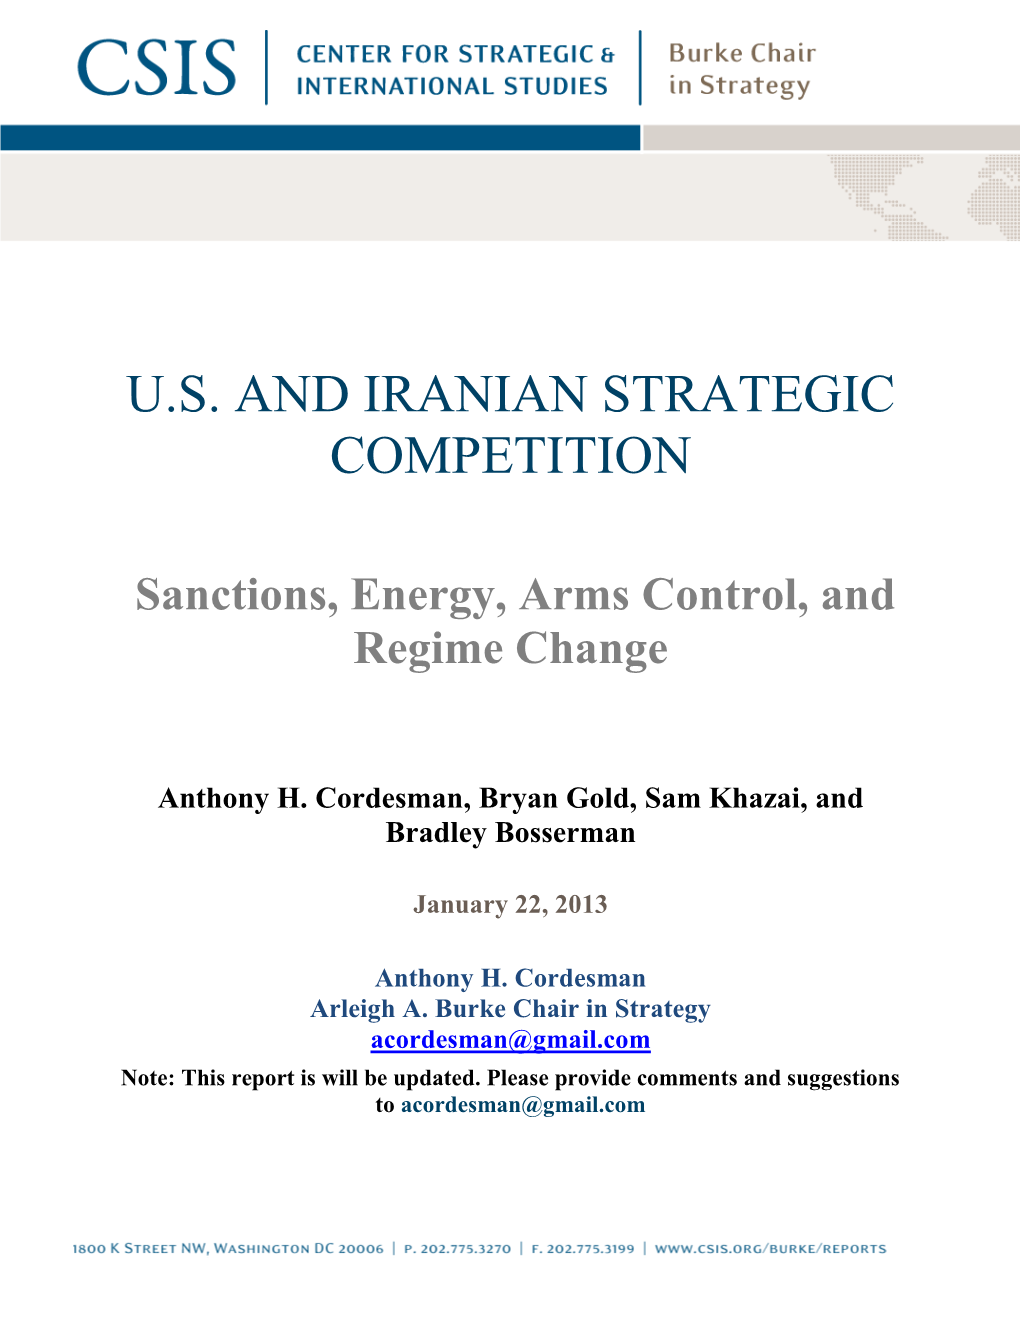 U.S. and Iranian Strategic Competition: Sanctions, Energy, Arms Control